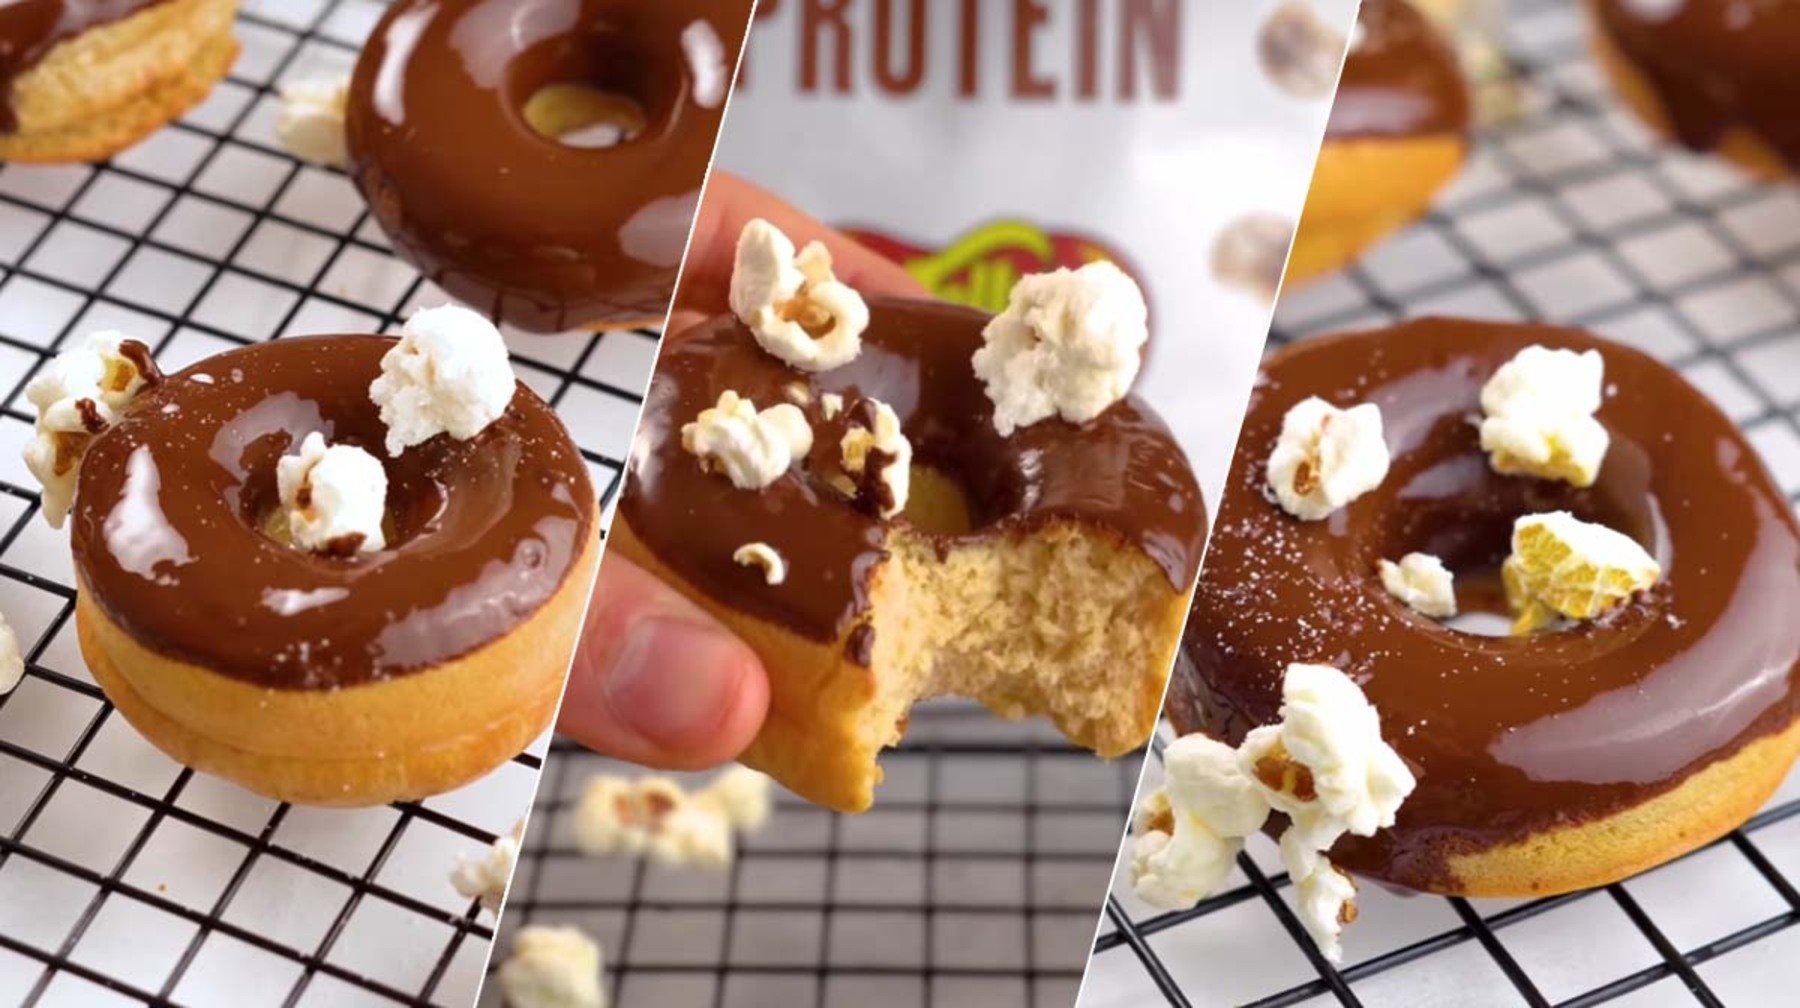 Jelly Belly Toasted Marshmallow Donuts